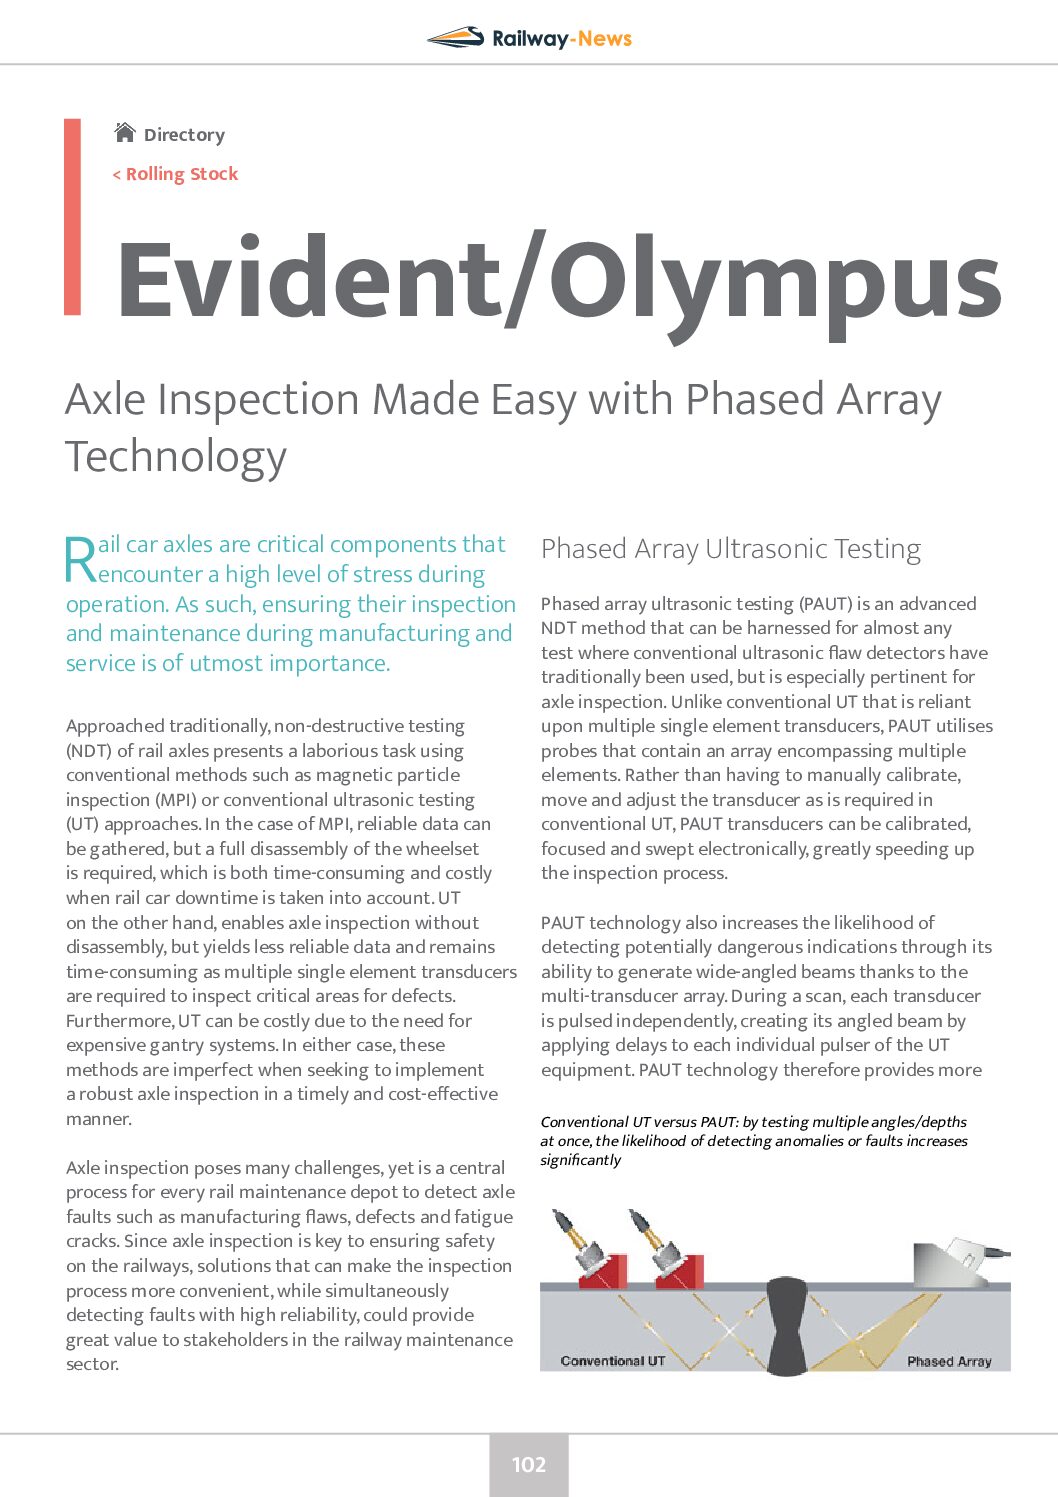 Axle Inspection Made Easy with Phased Array Technology